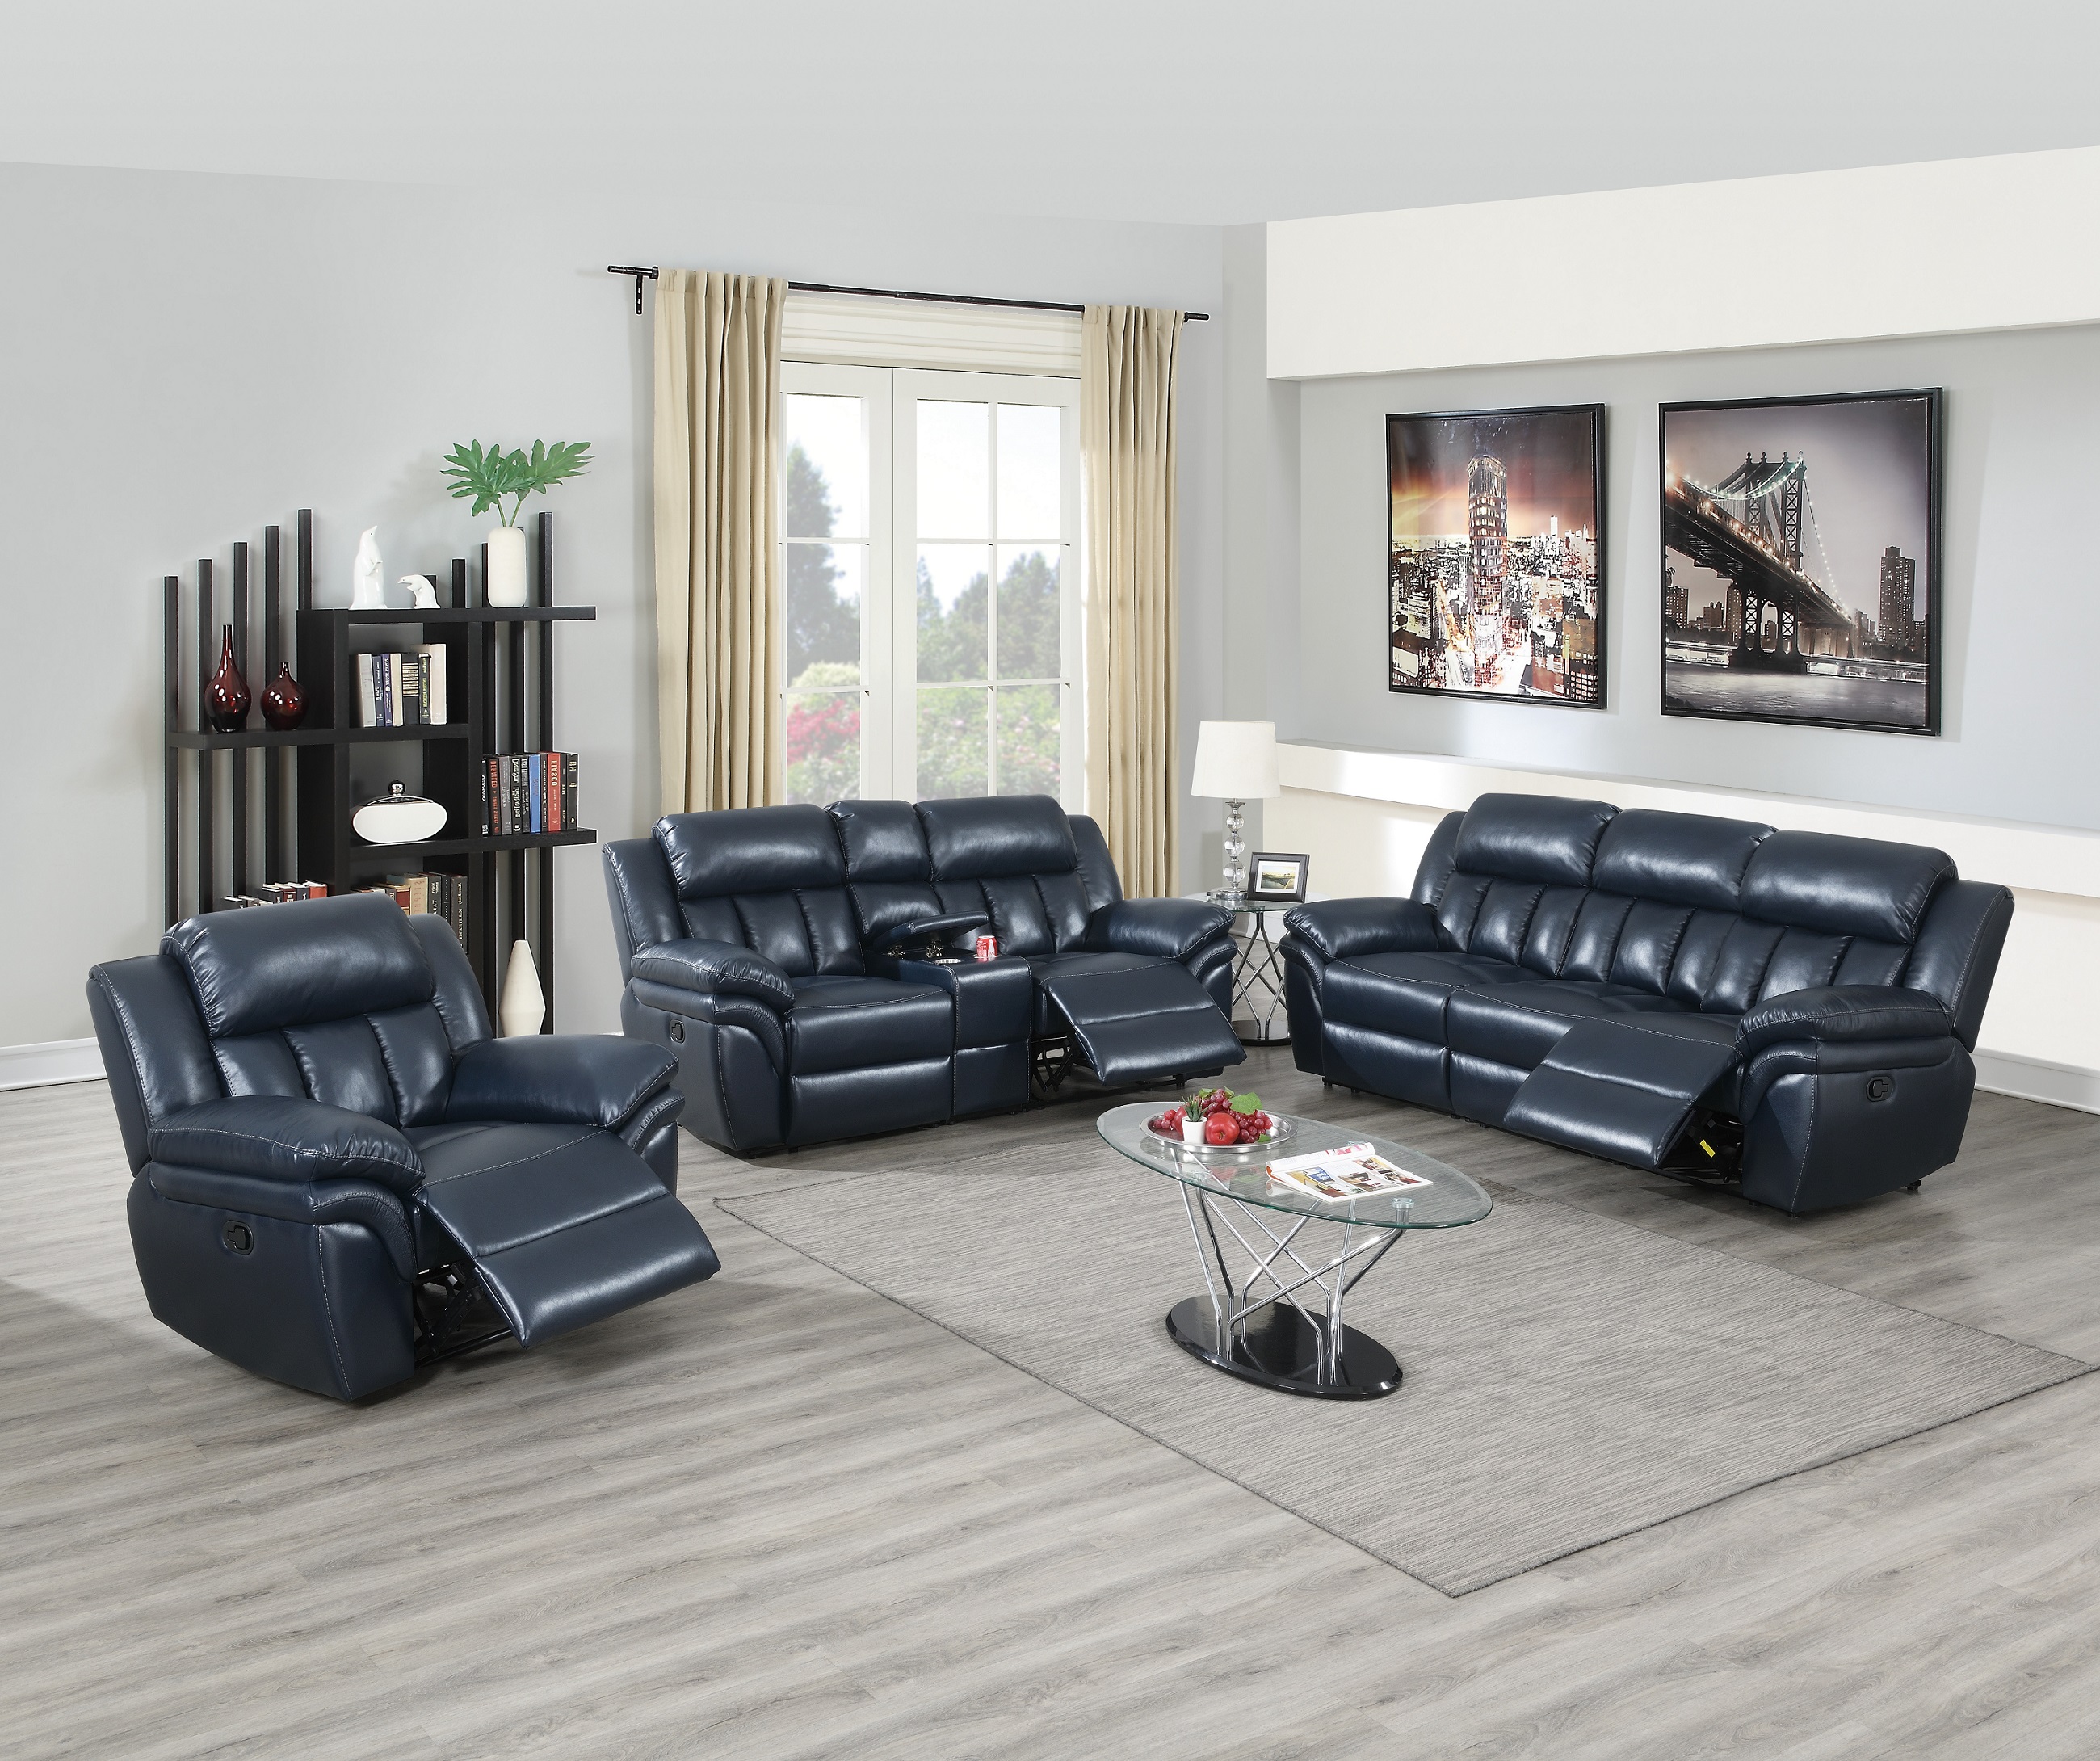 Recliner Furniture Couch, Navy Blue Leather Reclining Living Room Set